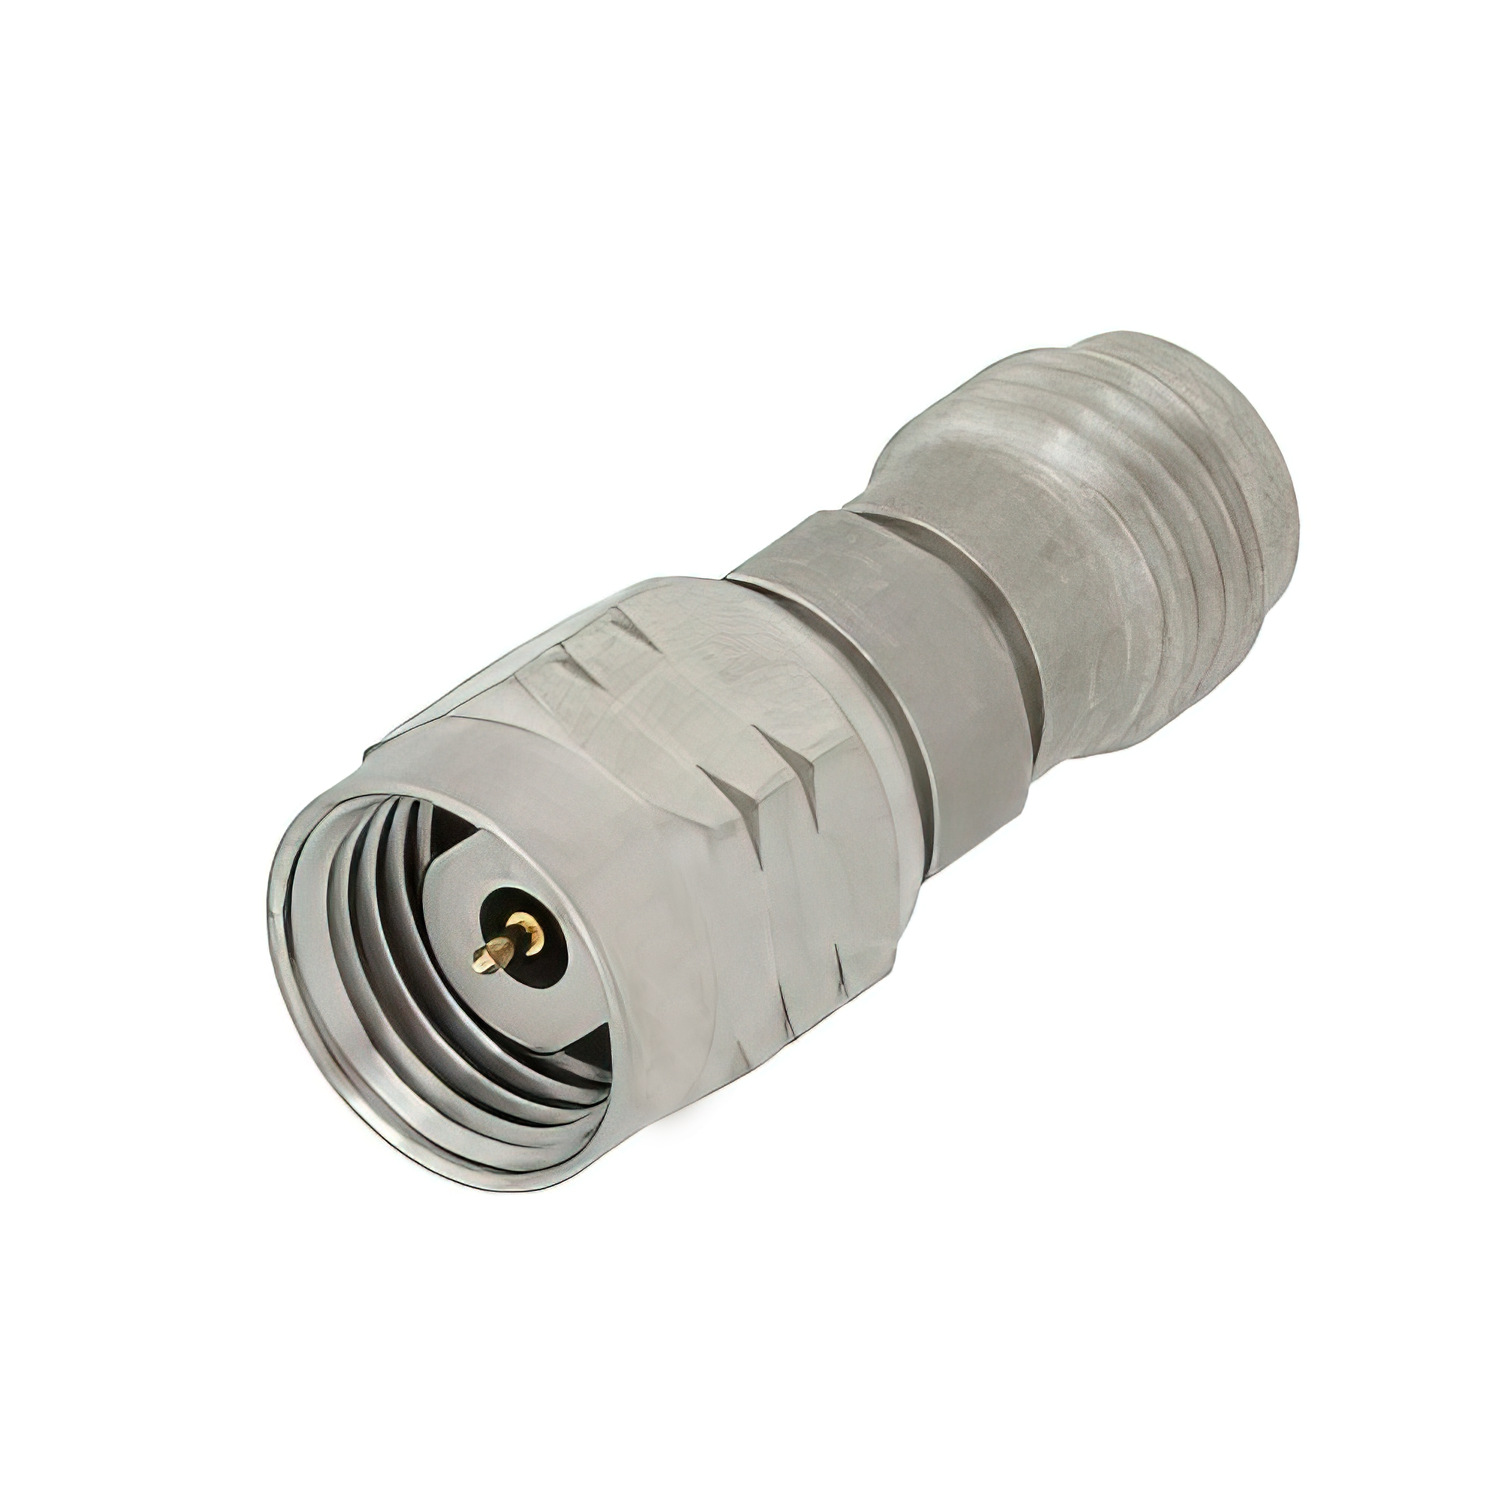 1.85mm male to 1.85mm female adapter1